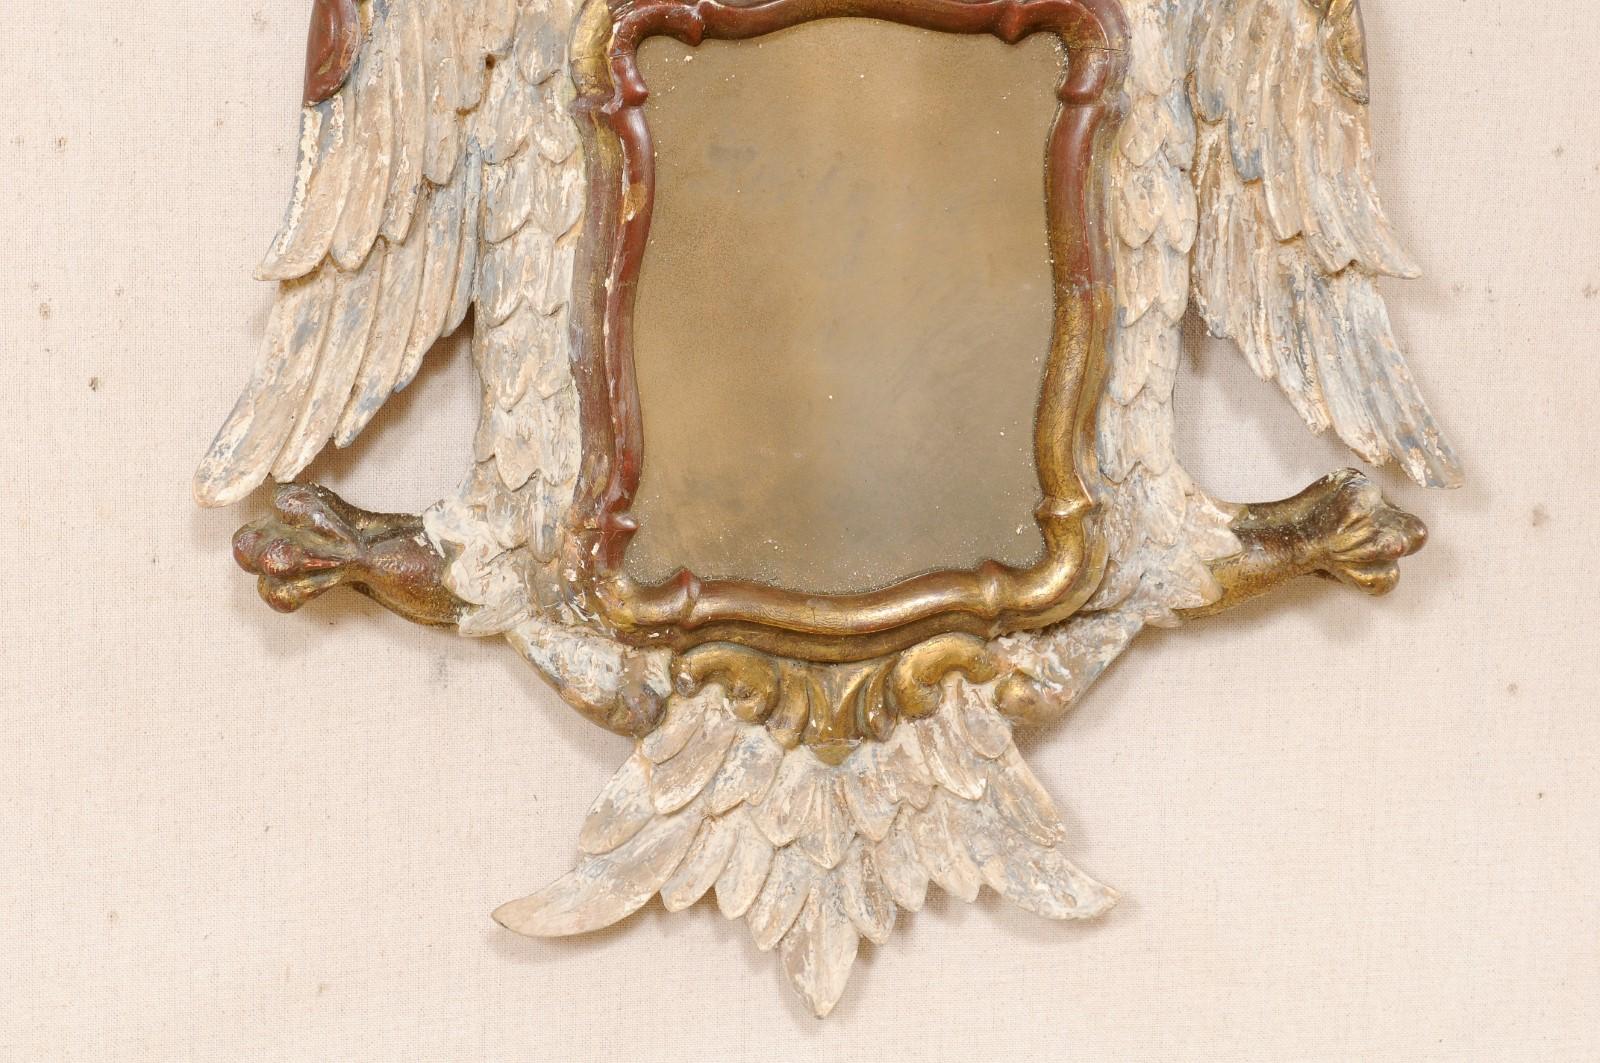 20th Century Italian Pair Federal-Style Eagle Wall Decorations with Mirror Centers